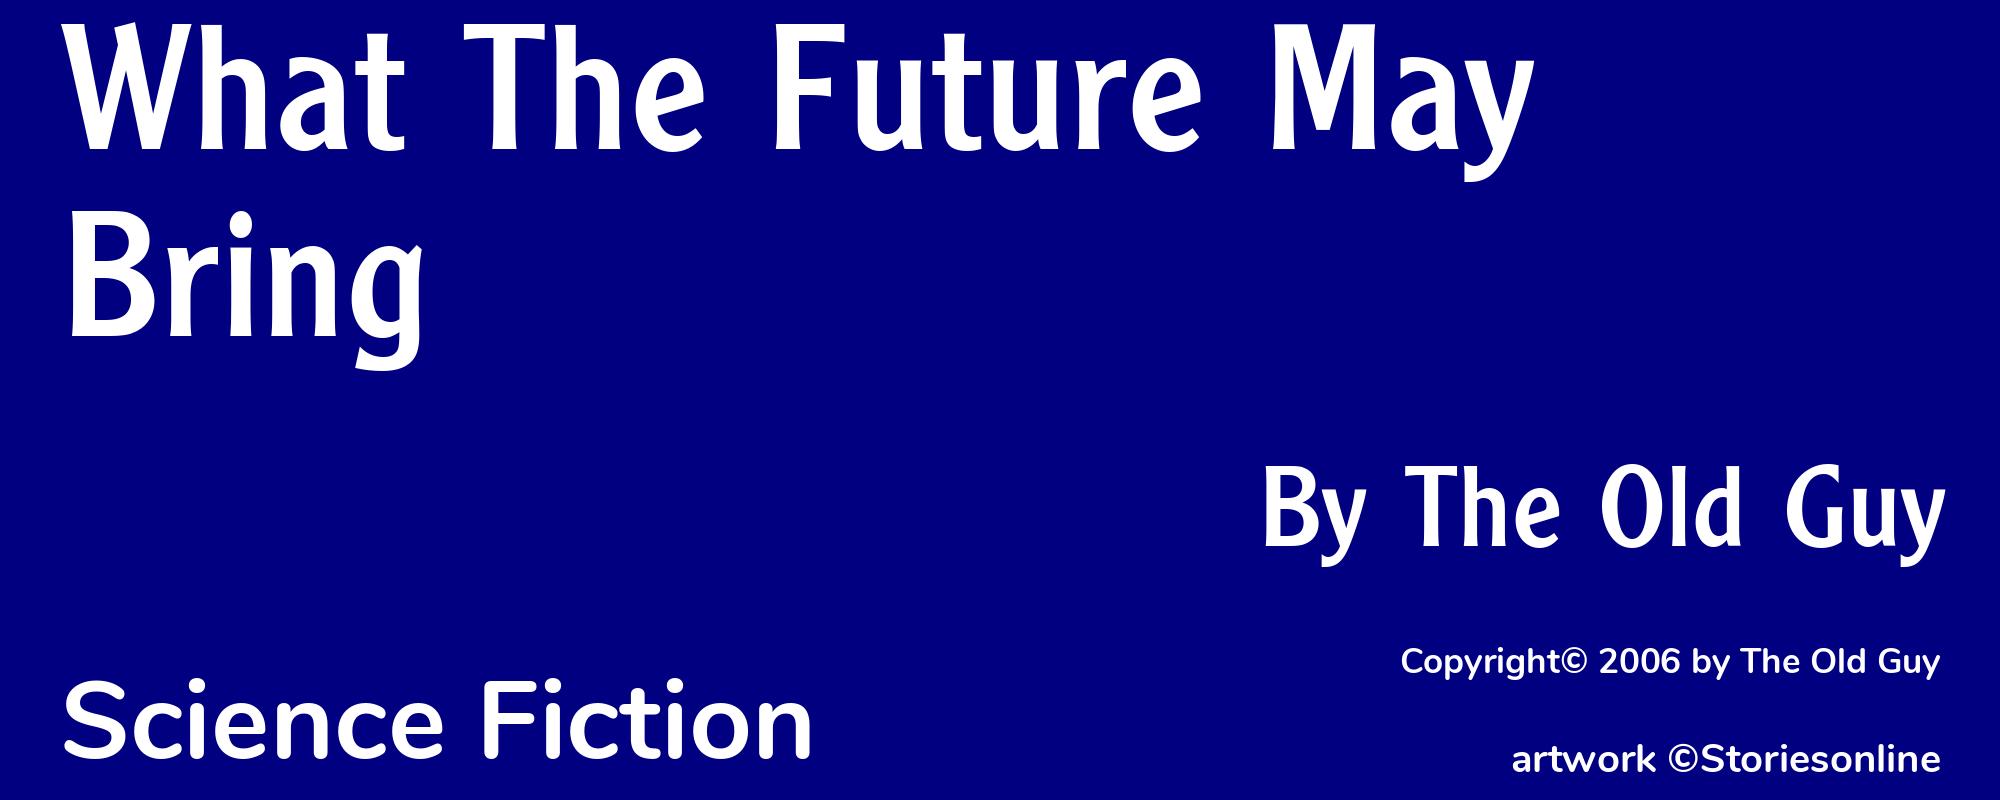 What The Future May Bring - Cover